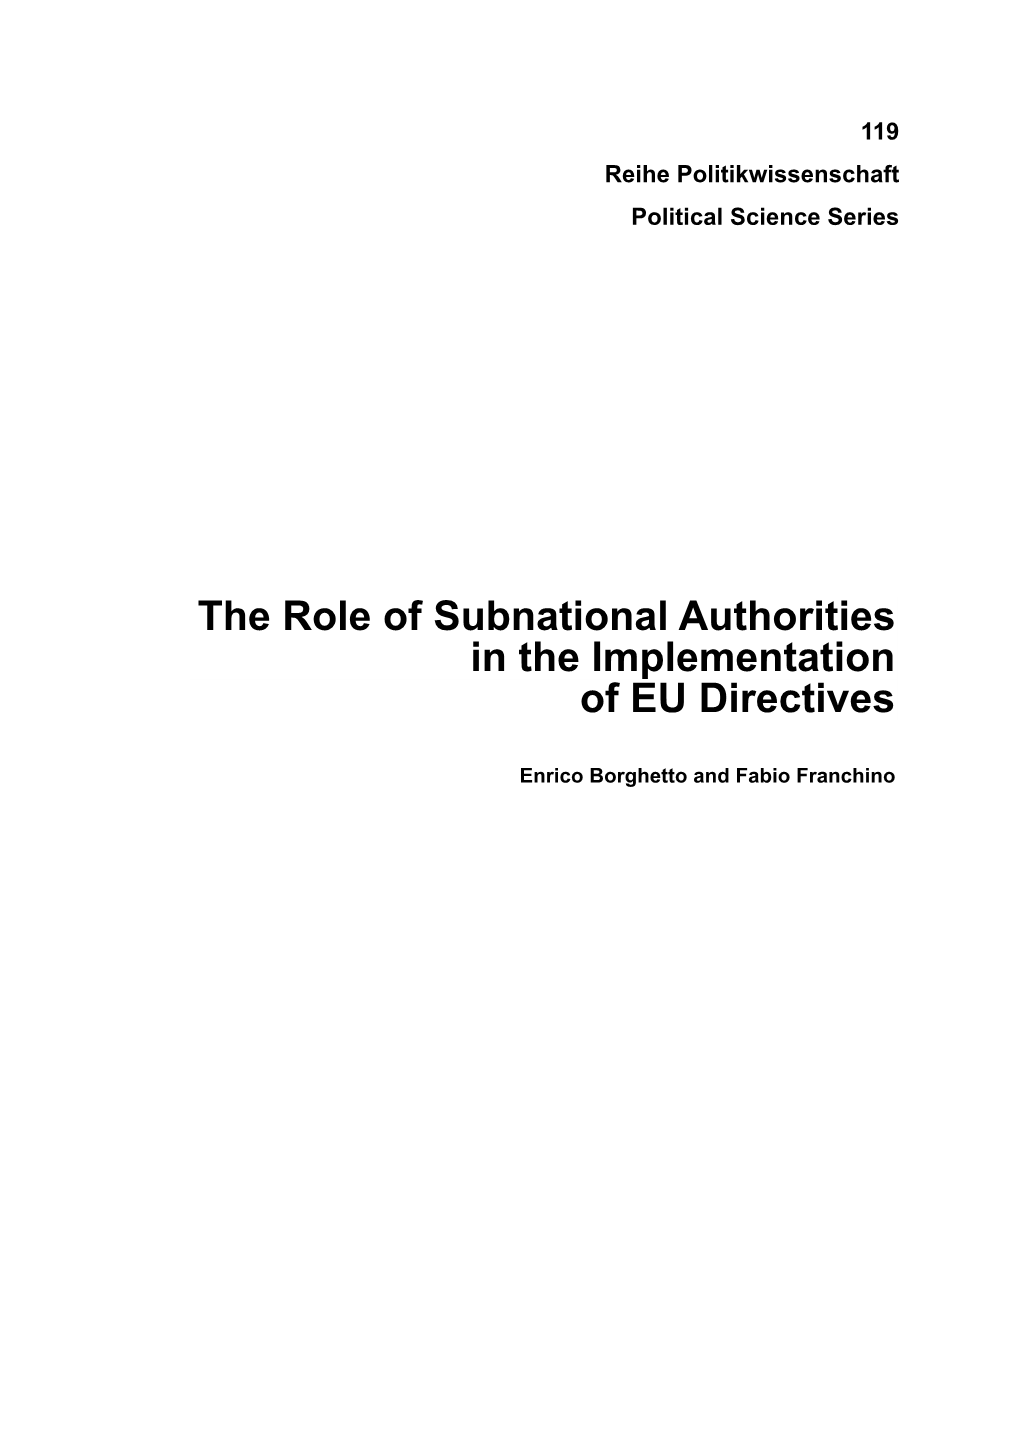 The Role of Subnational Authorities in the Implementation of EU Directives